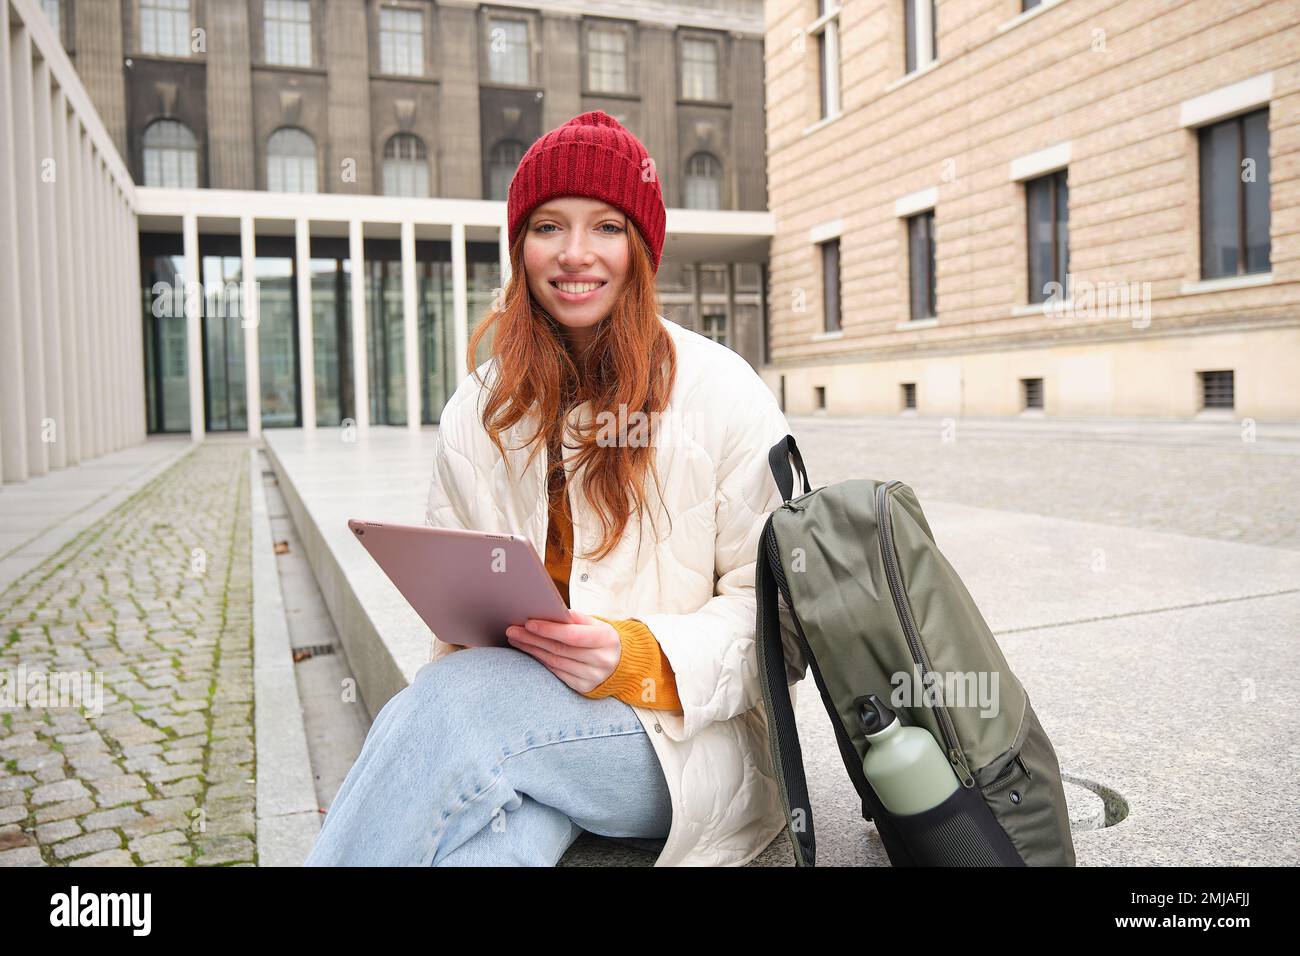 Beautiful redhead woman in red hat, sits with backpack and thermos, using digital tablet outdoors, connects to wifi, texts message, books tickets Stock Photo